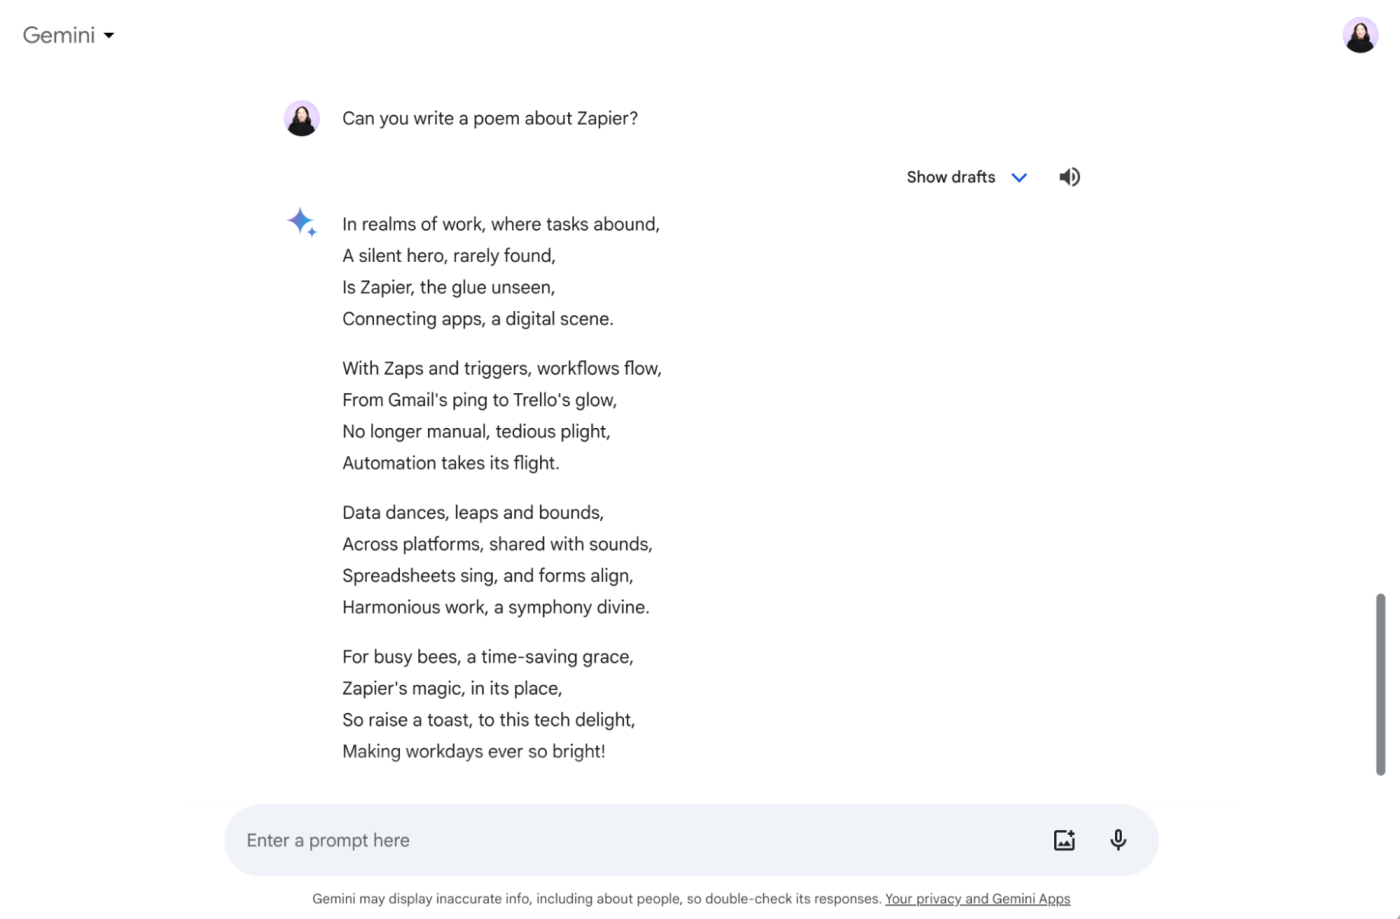 Gemini tries to write poetry about Zapier.